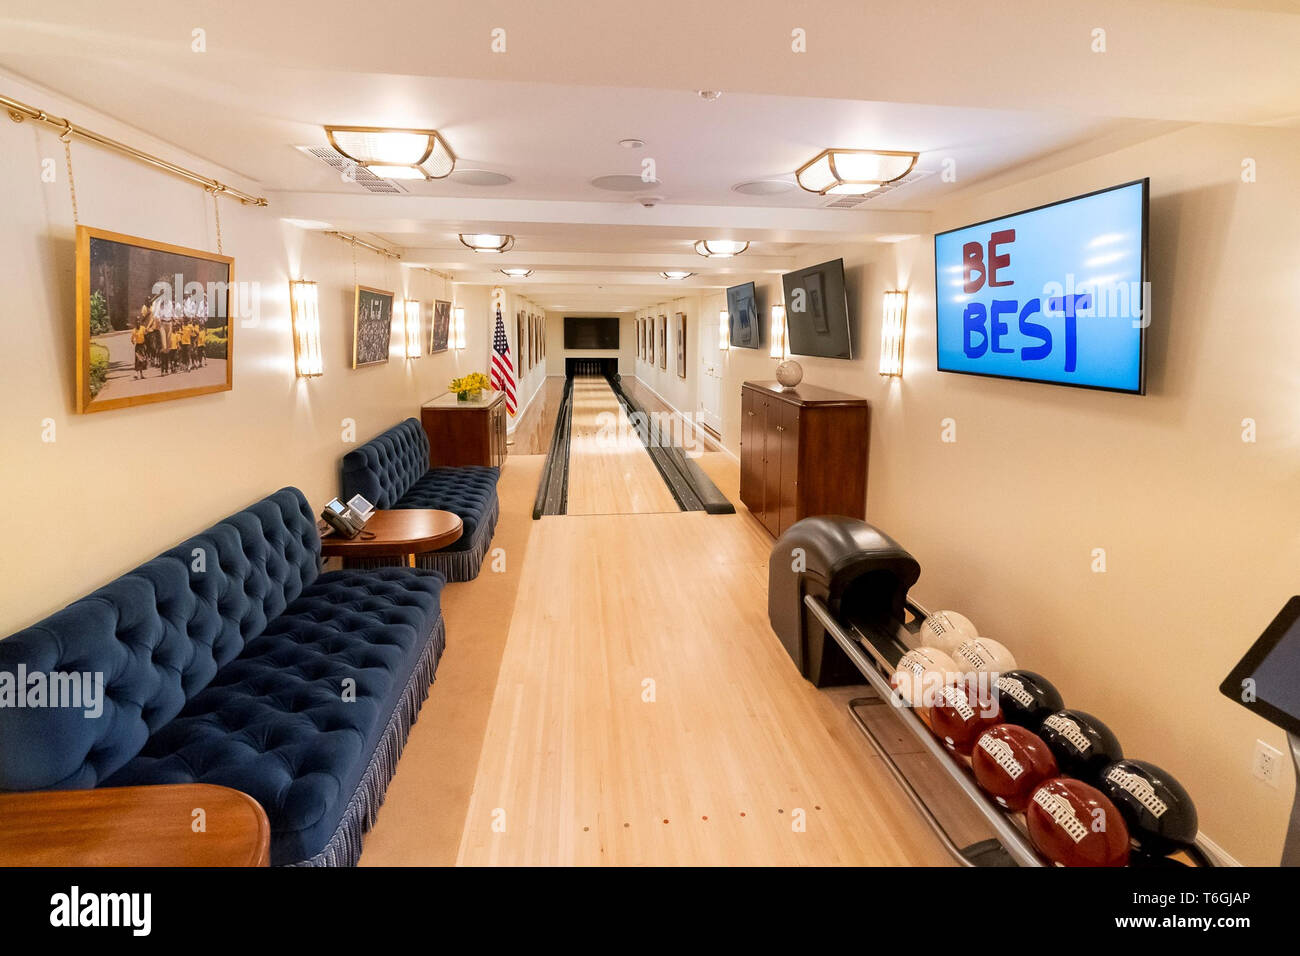 Washington DC, USA. 01st May, 2019. First Lady Melania Trump welcomed children from her United States Secret Service detail to spend an afternoon bowling inside the newly renovated bowling alley at the White House. The White House Bowling Alley, located in the Residence, was first installed in 1973 during the Nixon Administration.  Since itÕs installation, many presidents and first families have enjoyed use of the bowling alley.   The original 1973 design lasted until 1994 under the Clinton Administration, which oversaw the last major renovation. Credit: Storms Media Group/Alamy Live News Stock Photo